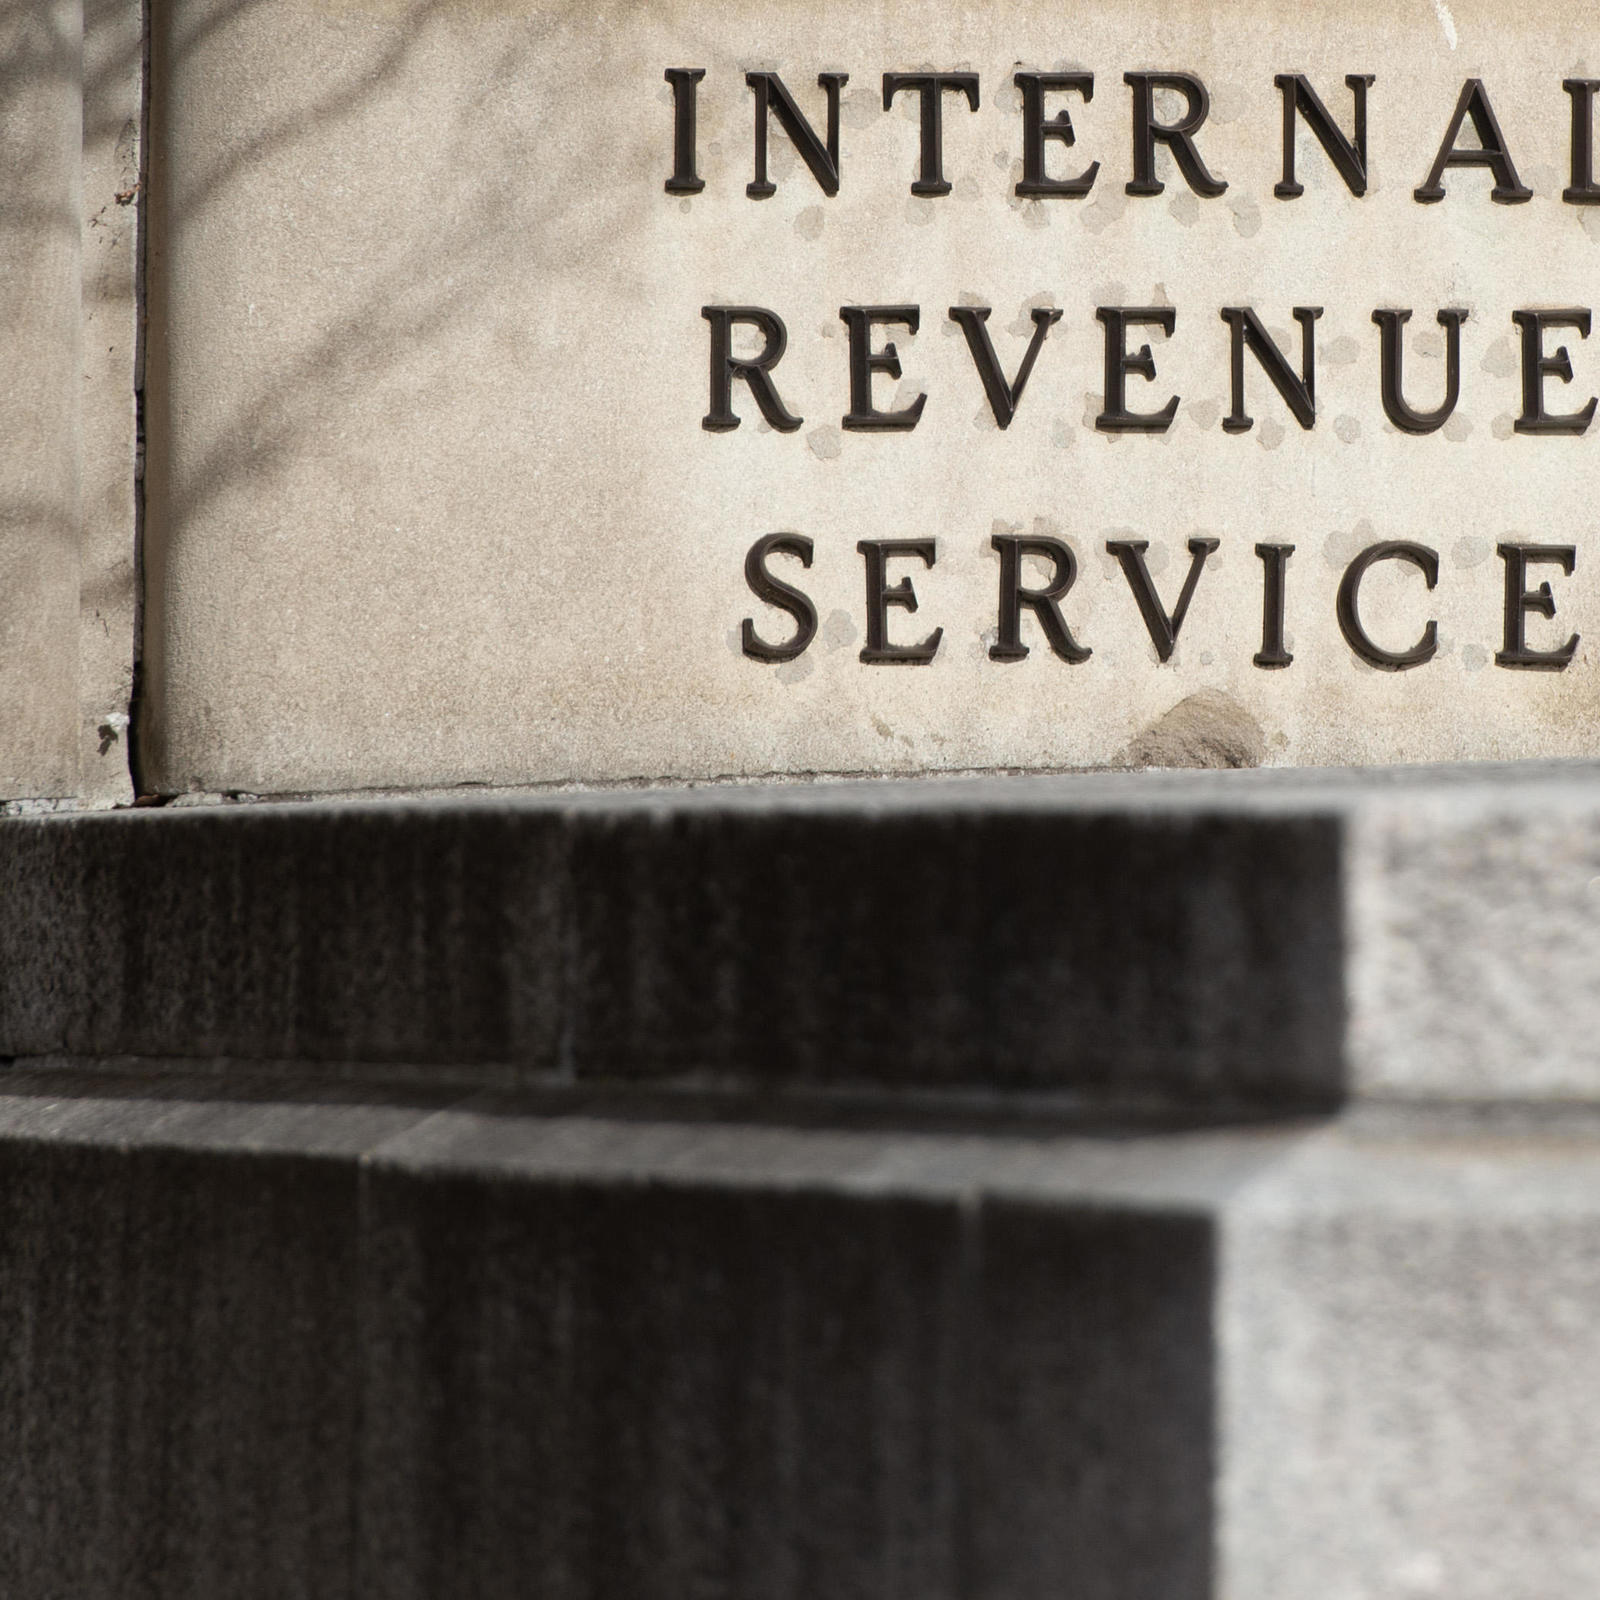 IRS Warns Of New Tax Refund Scam